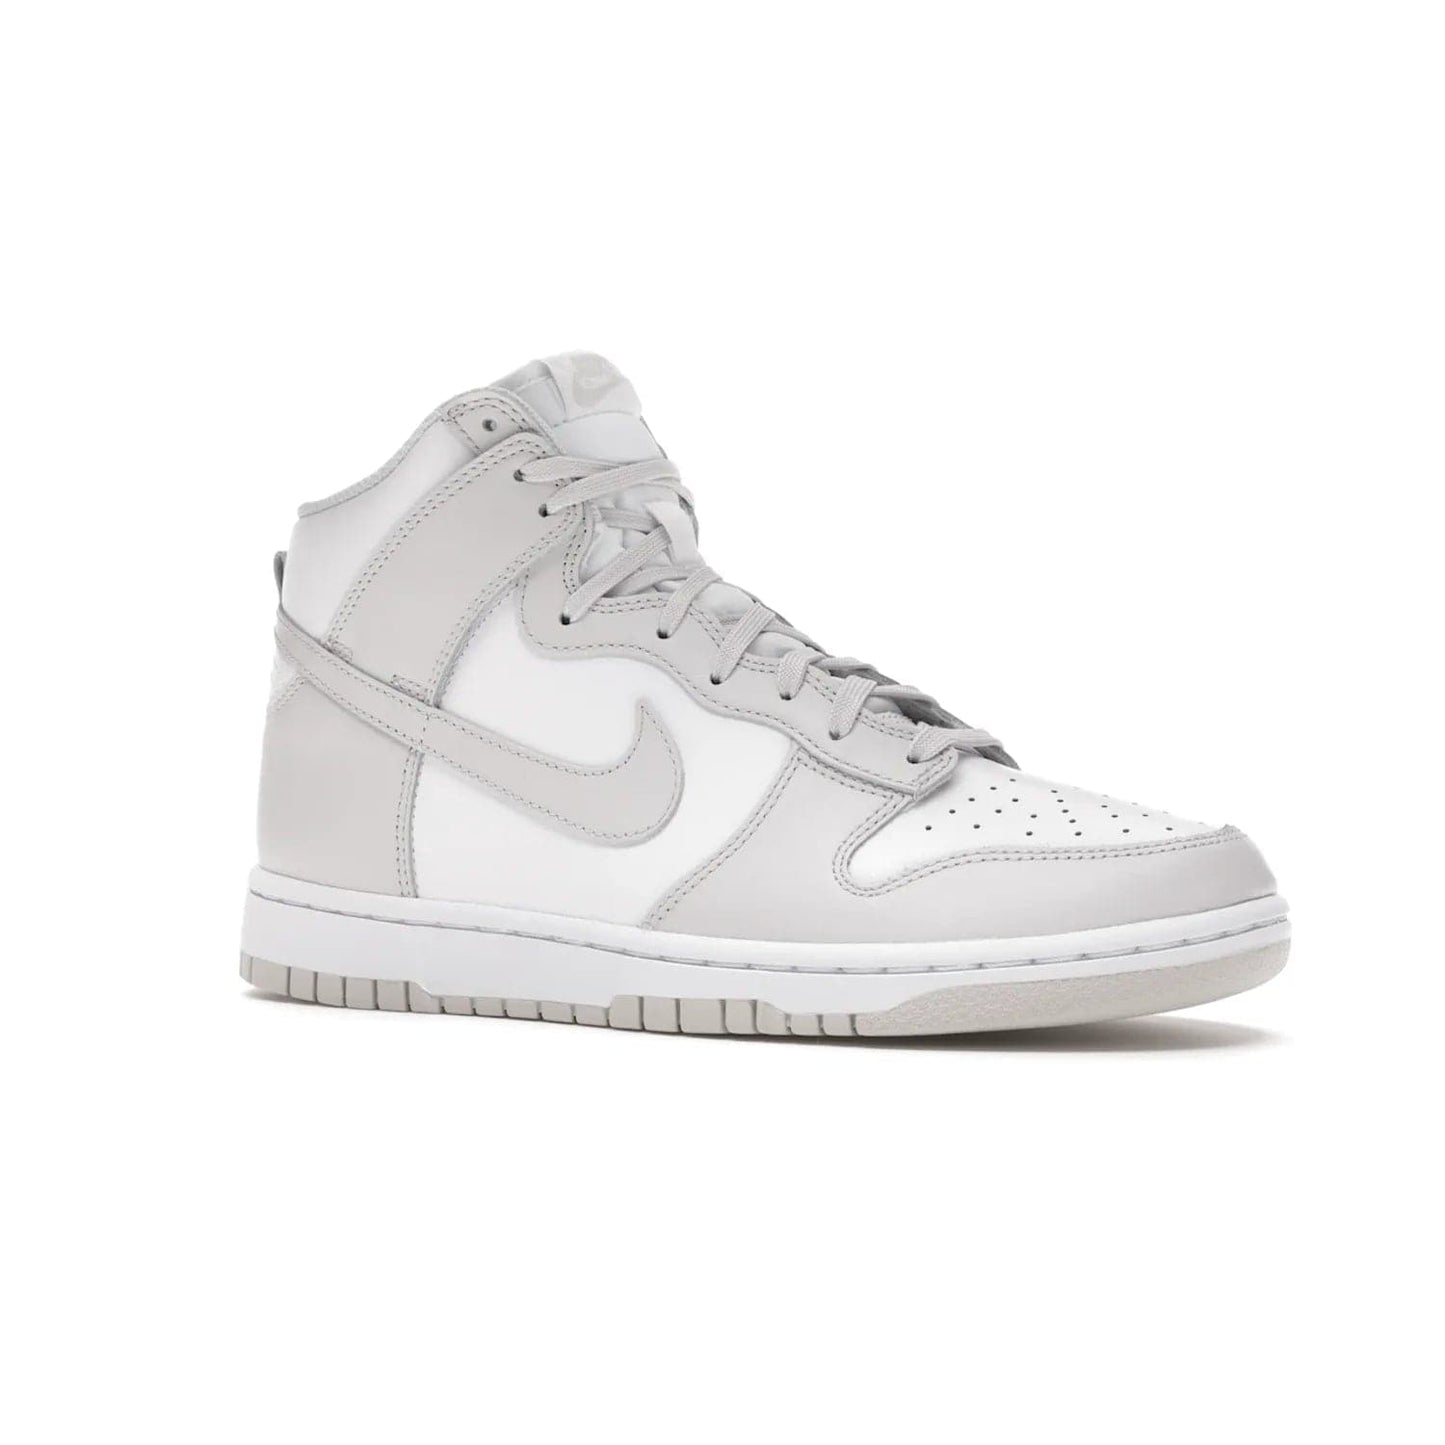 Nike Dunk High Retro White Vast Grey (2021) - Image 4 - Only at www.BallersClubKickz.com - Nike Dunk High Retro White Vast Grey 2021: classic '80s basketball sneaker with a crisp white base, grey overlays, midsole tooling and outsole. Dropped Feb. 2021.